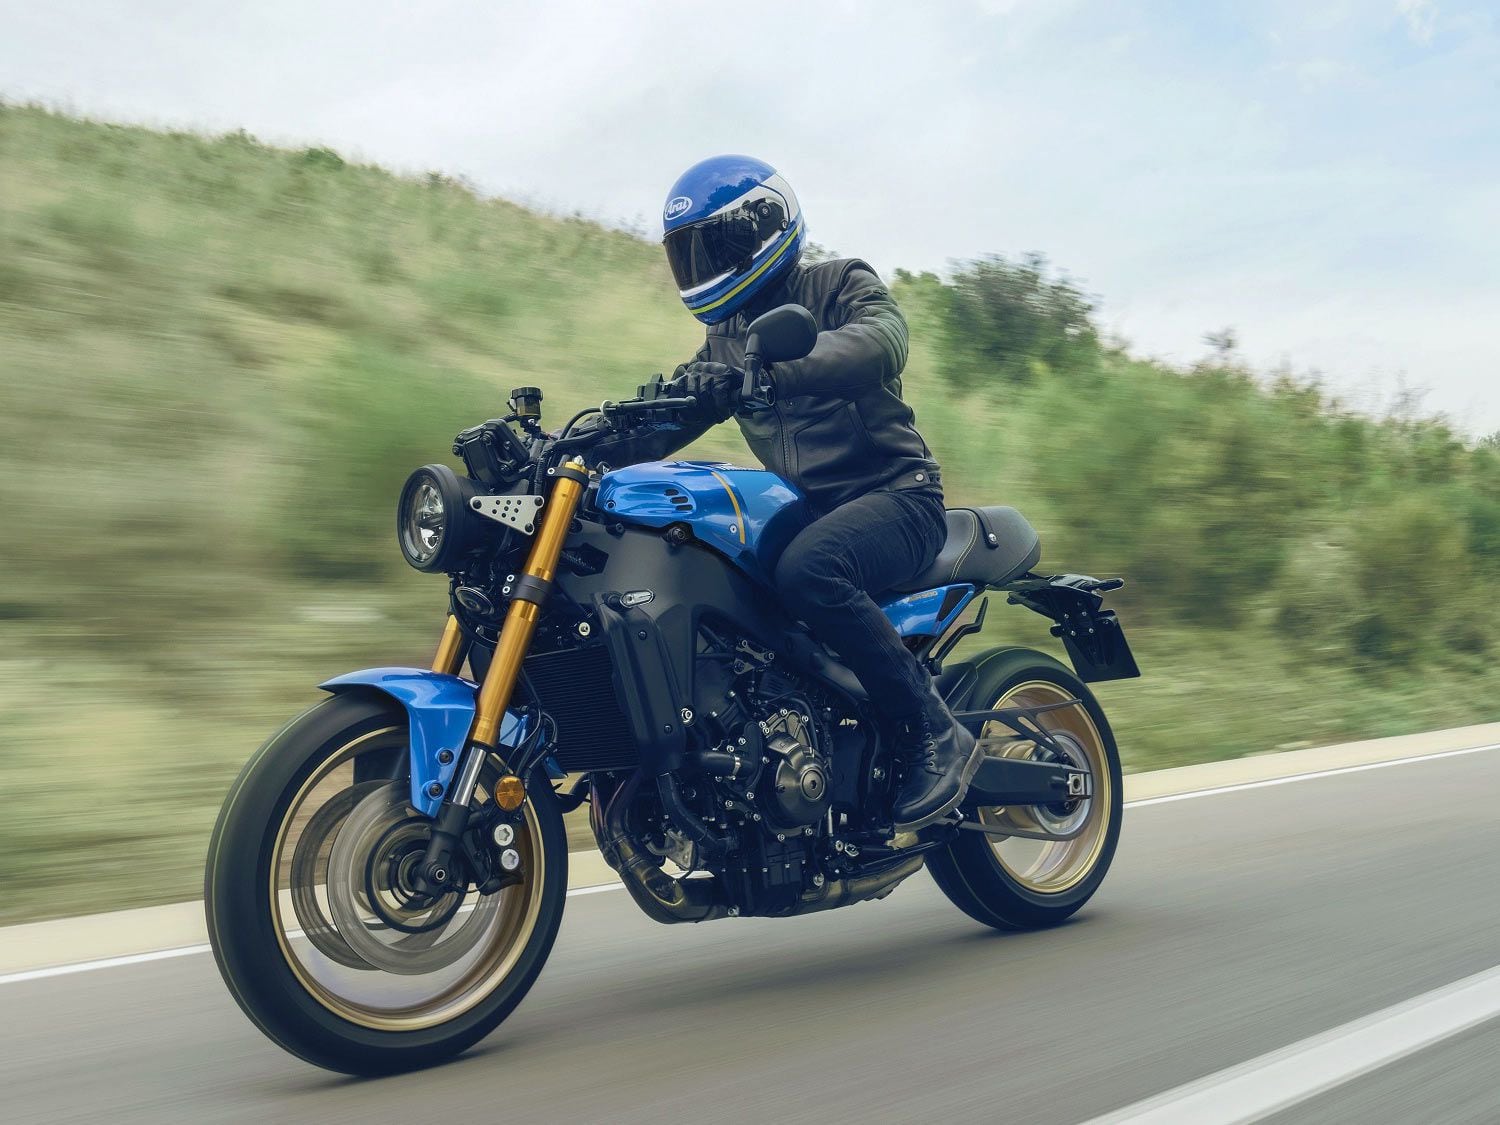 Trademarks for the R9 name have already been filed around the world, and with the CP3 engine and Deltabox frame in use on the XSR900 (shown), a faired R9 seems like a given.